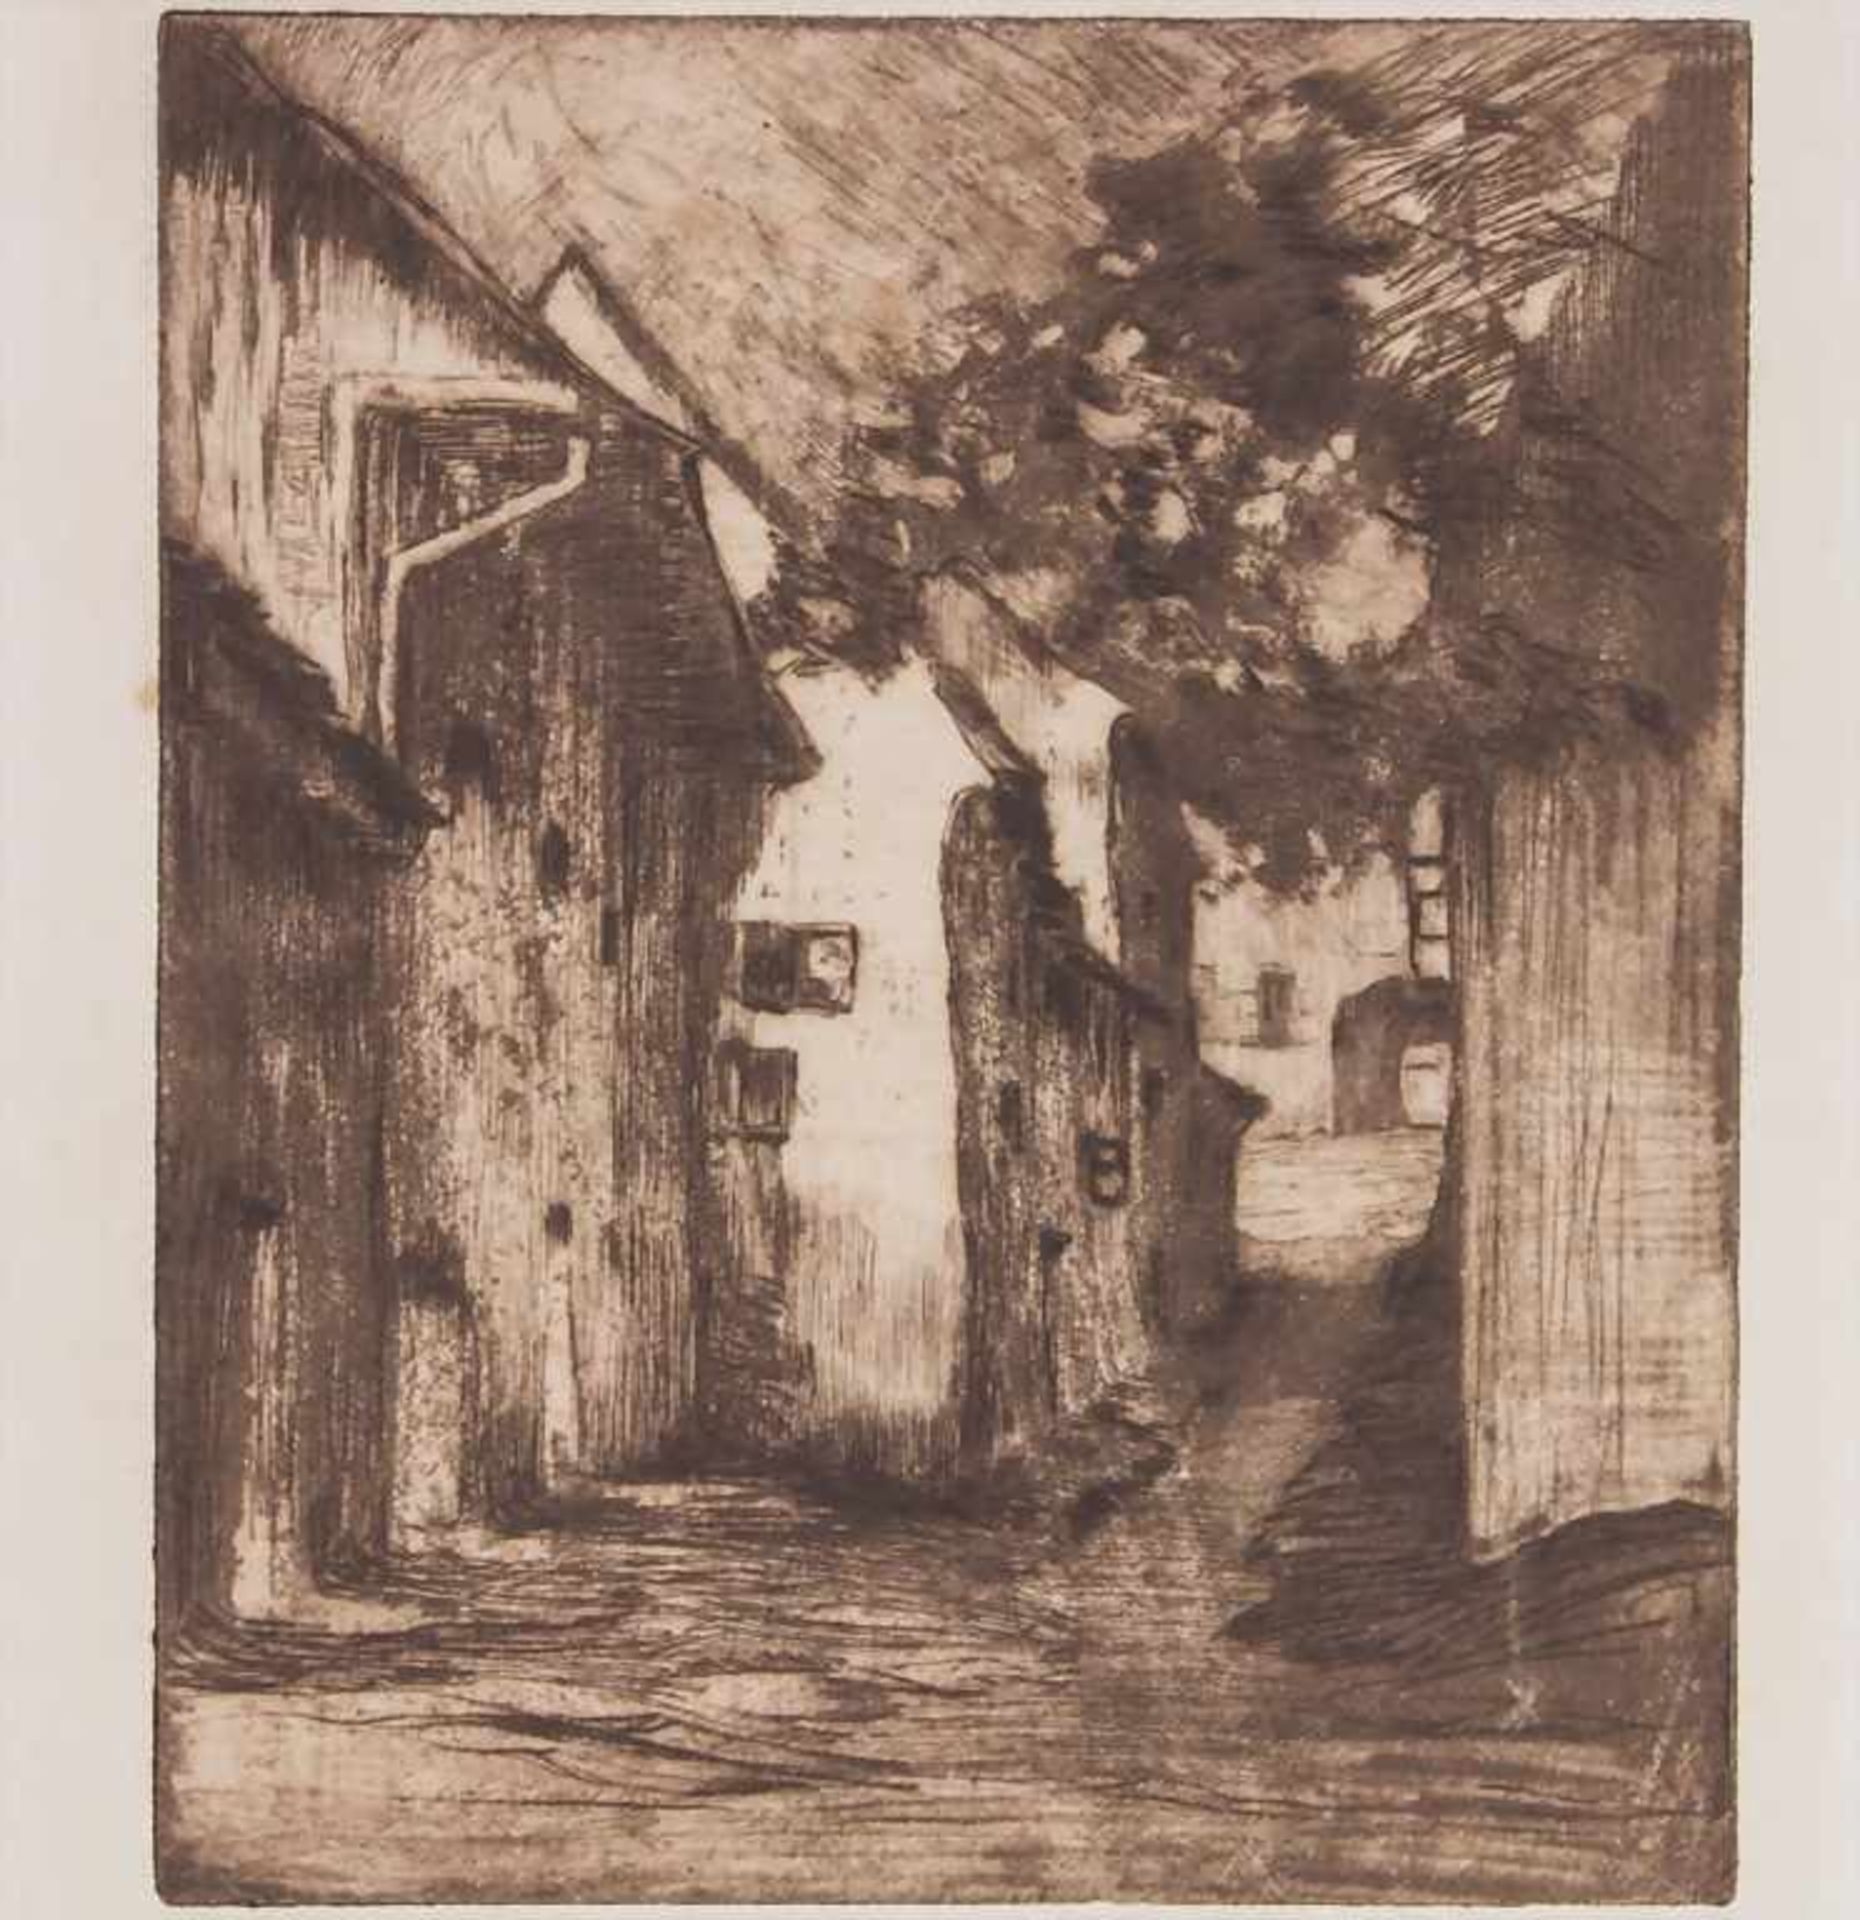 Richard Canisius (1872-1934), 'Gasse' / 'An alley'